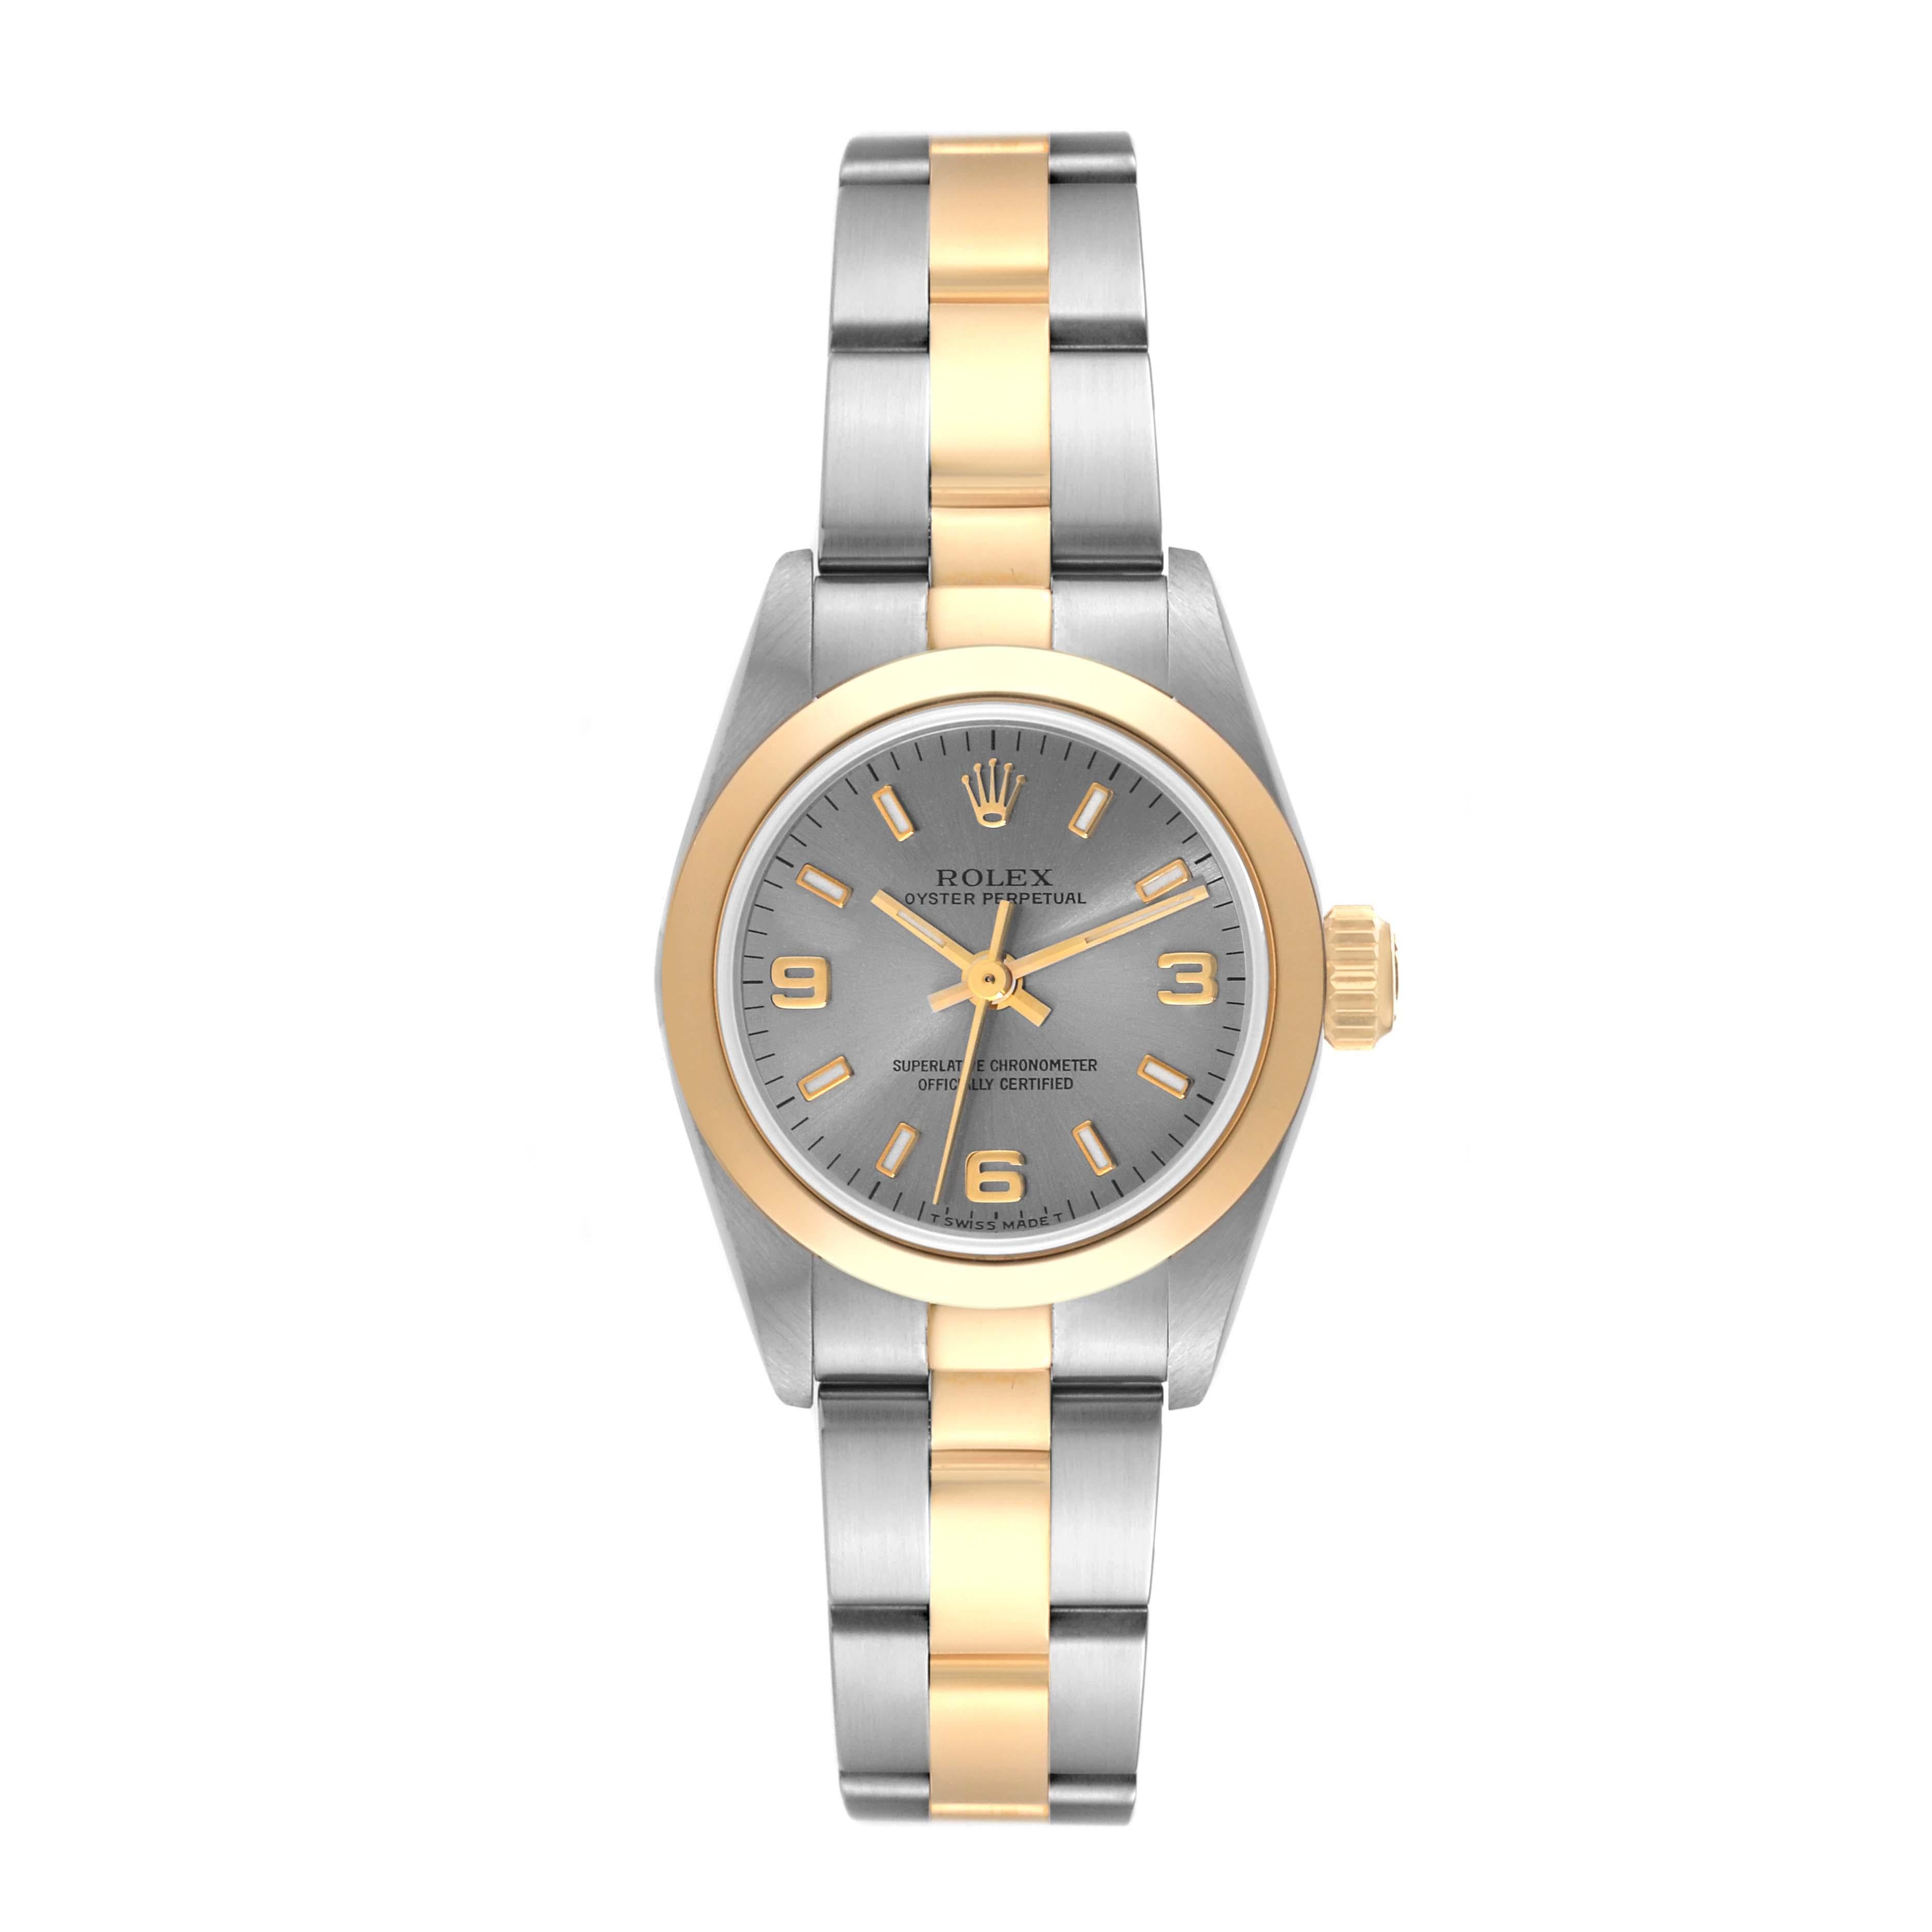 Rolex Oyster Perpetual Steel Yellow Gold Slate Dial Ladies Watch 67183. Officially certified chronometer automatic self-winding movement. Stainless steel oyster case 24.0 mm in diameter. Rolex logo on an 18k yellow gold crown. 18k yellow gold smooth